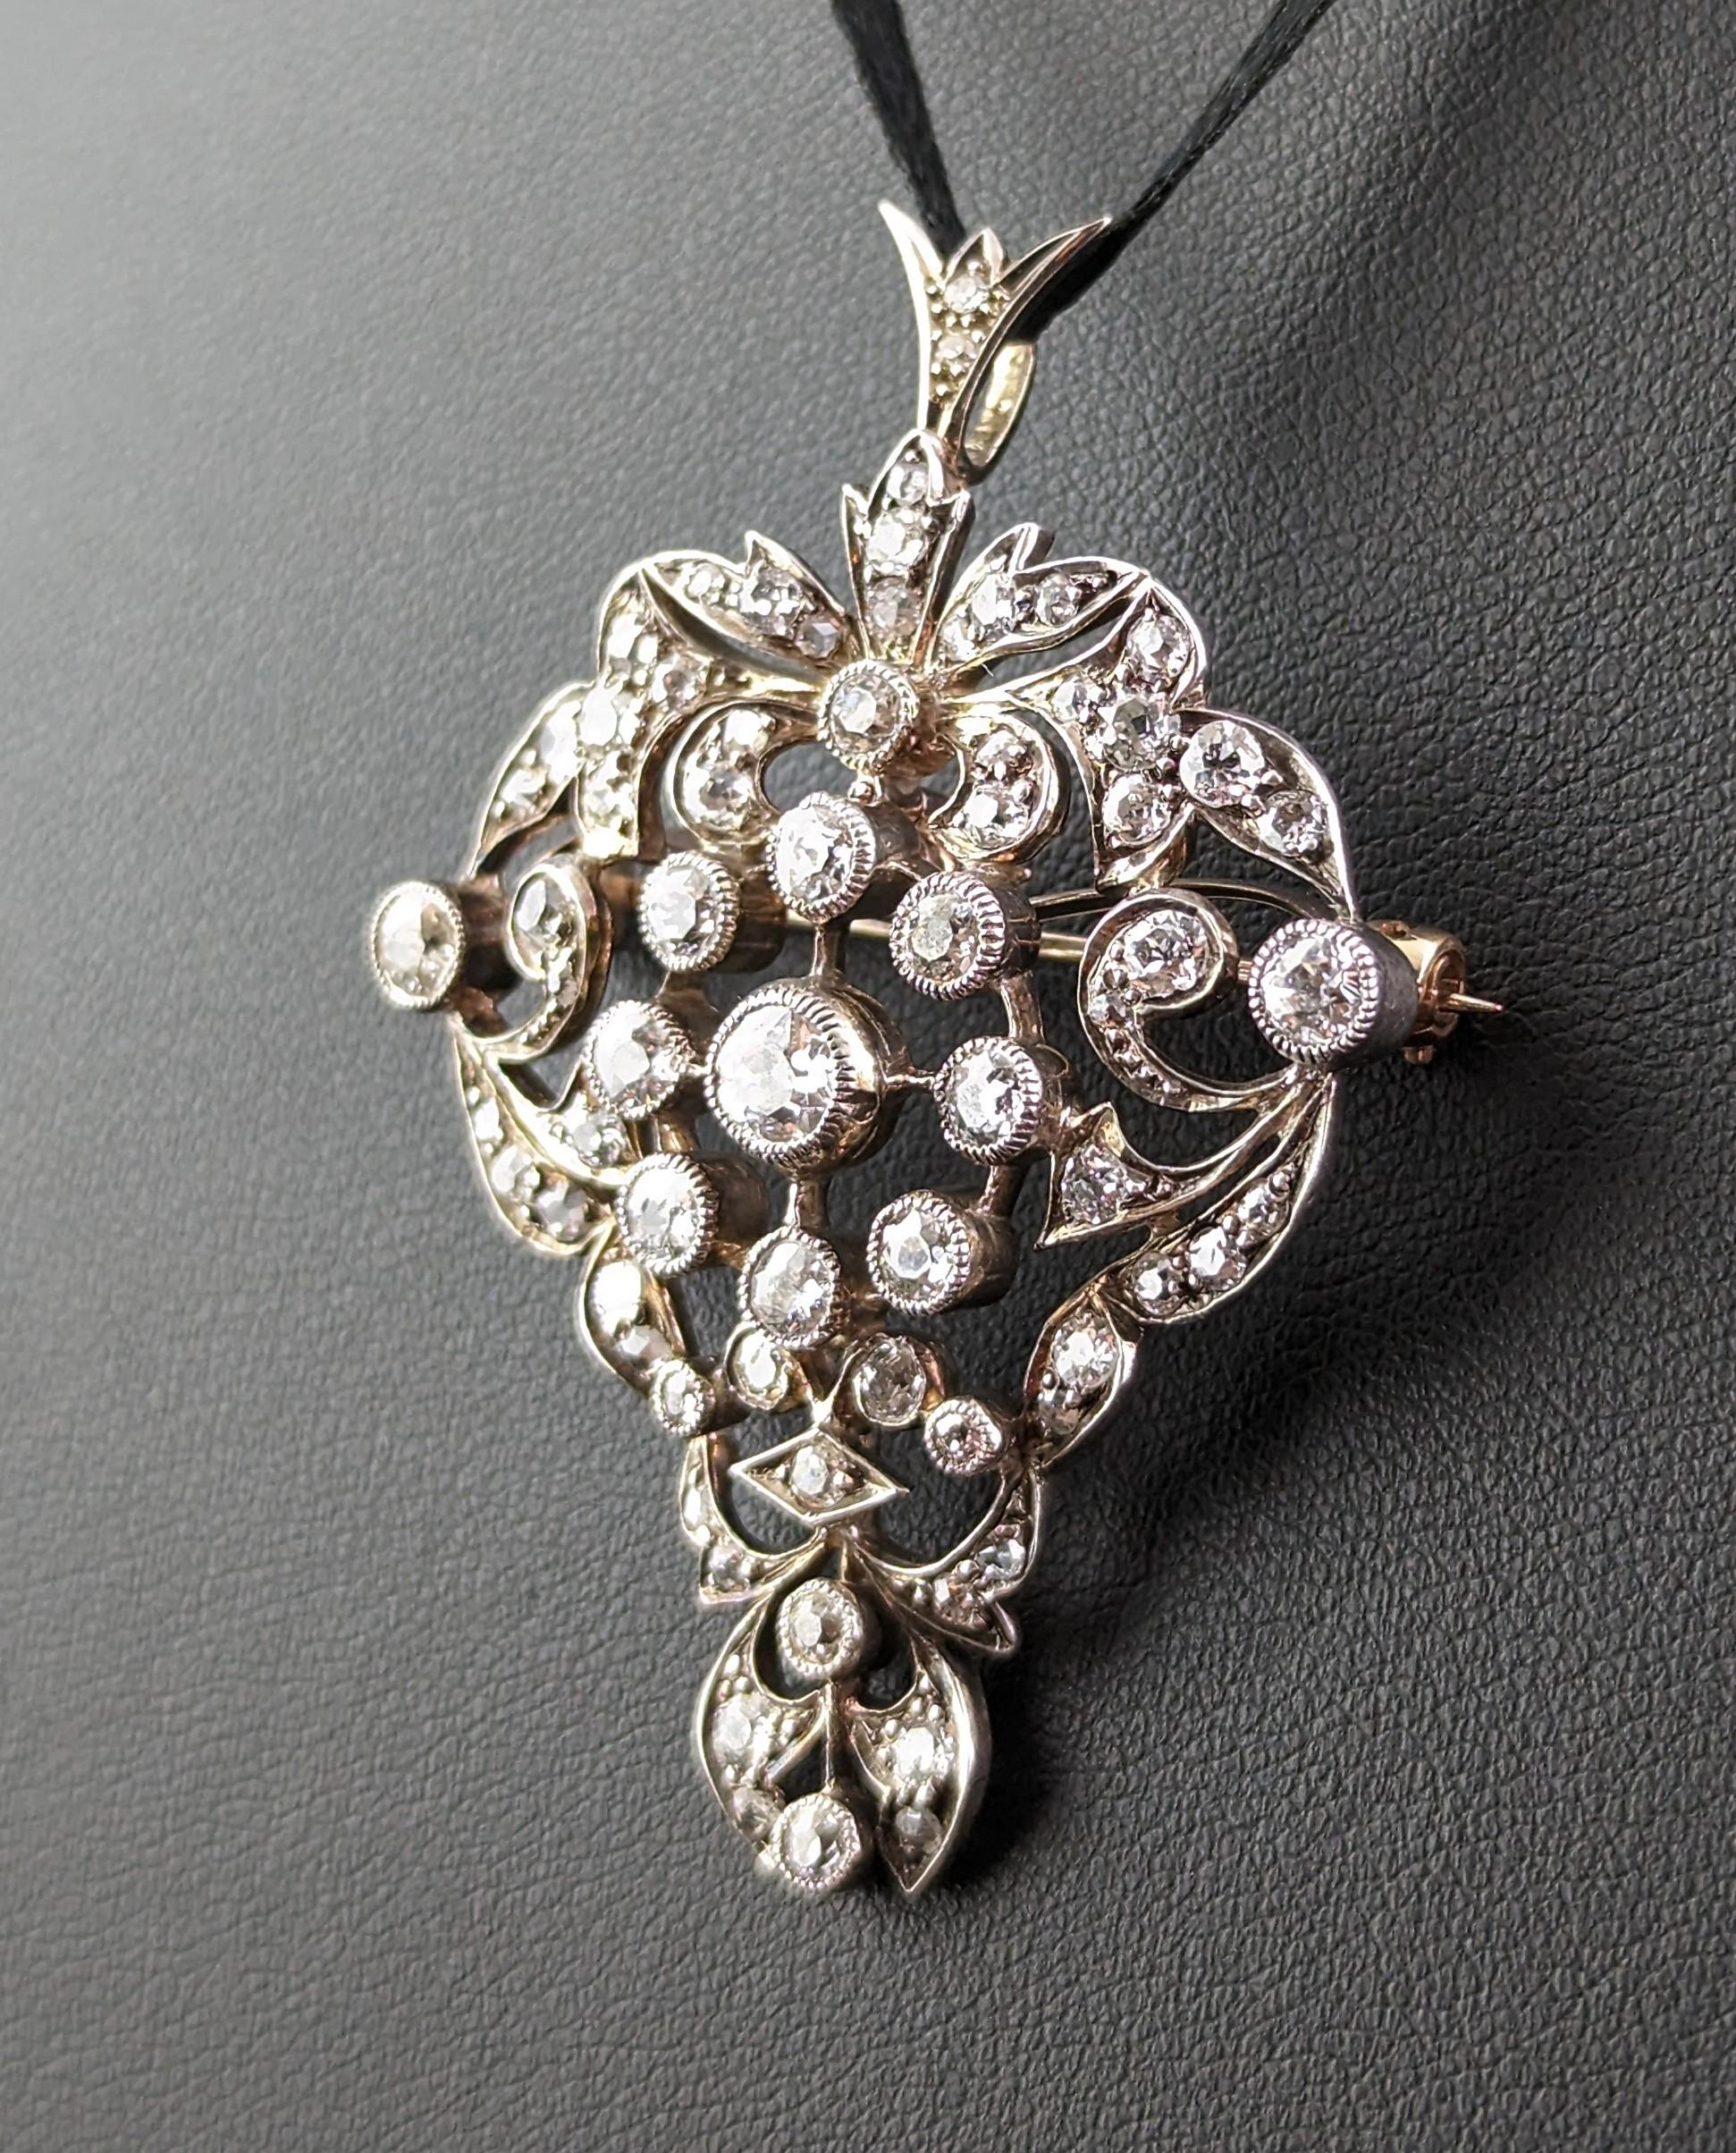 Women's Antique Victorian Diamond Pendant Brooch, Bunch of Grapes, 9k Gold and Silver For Sale